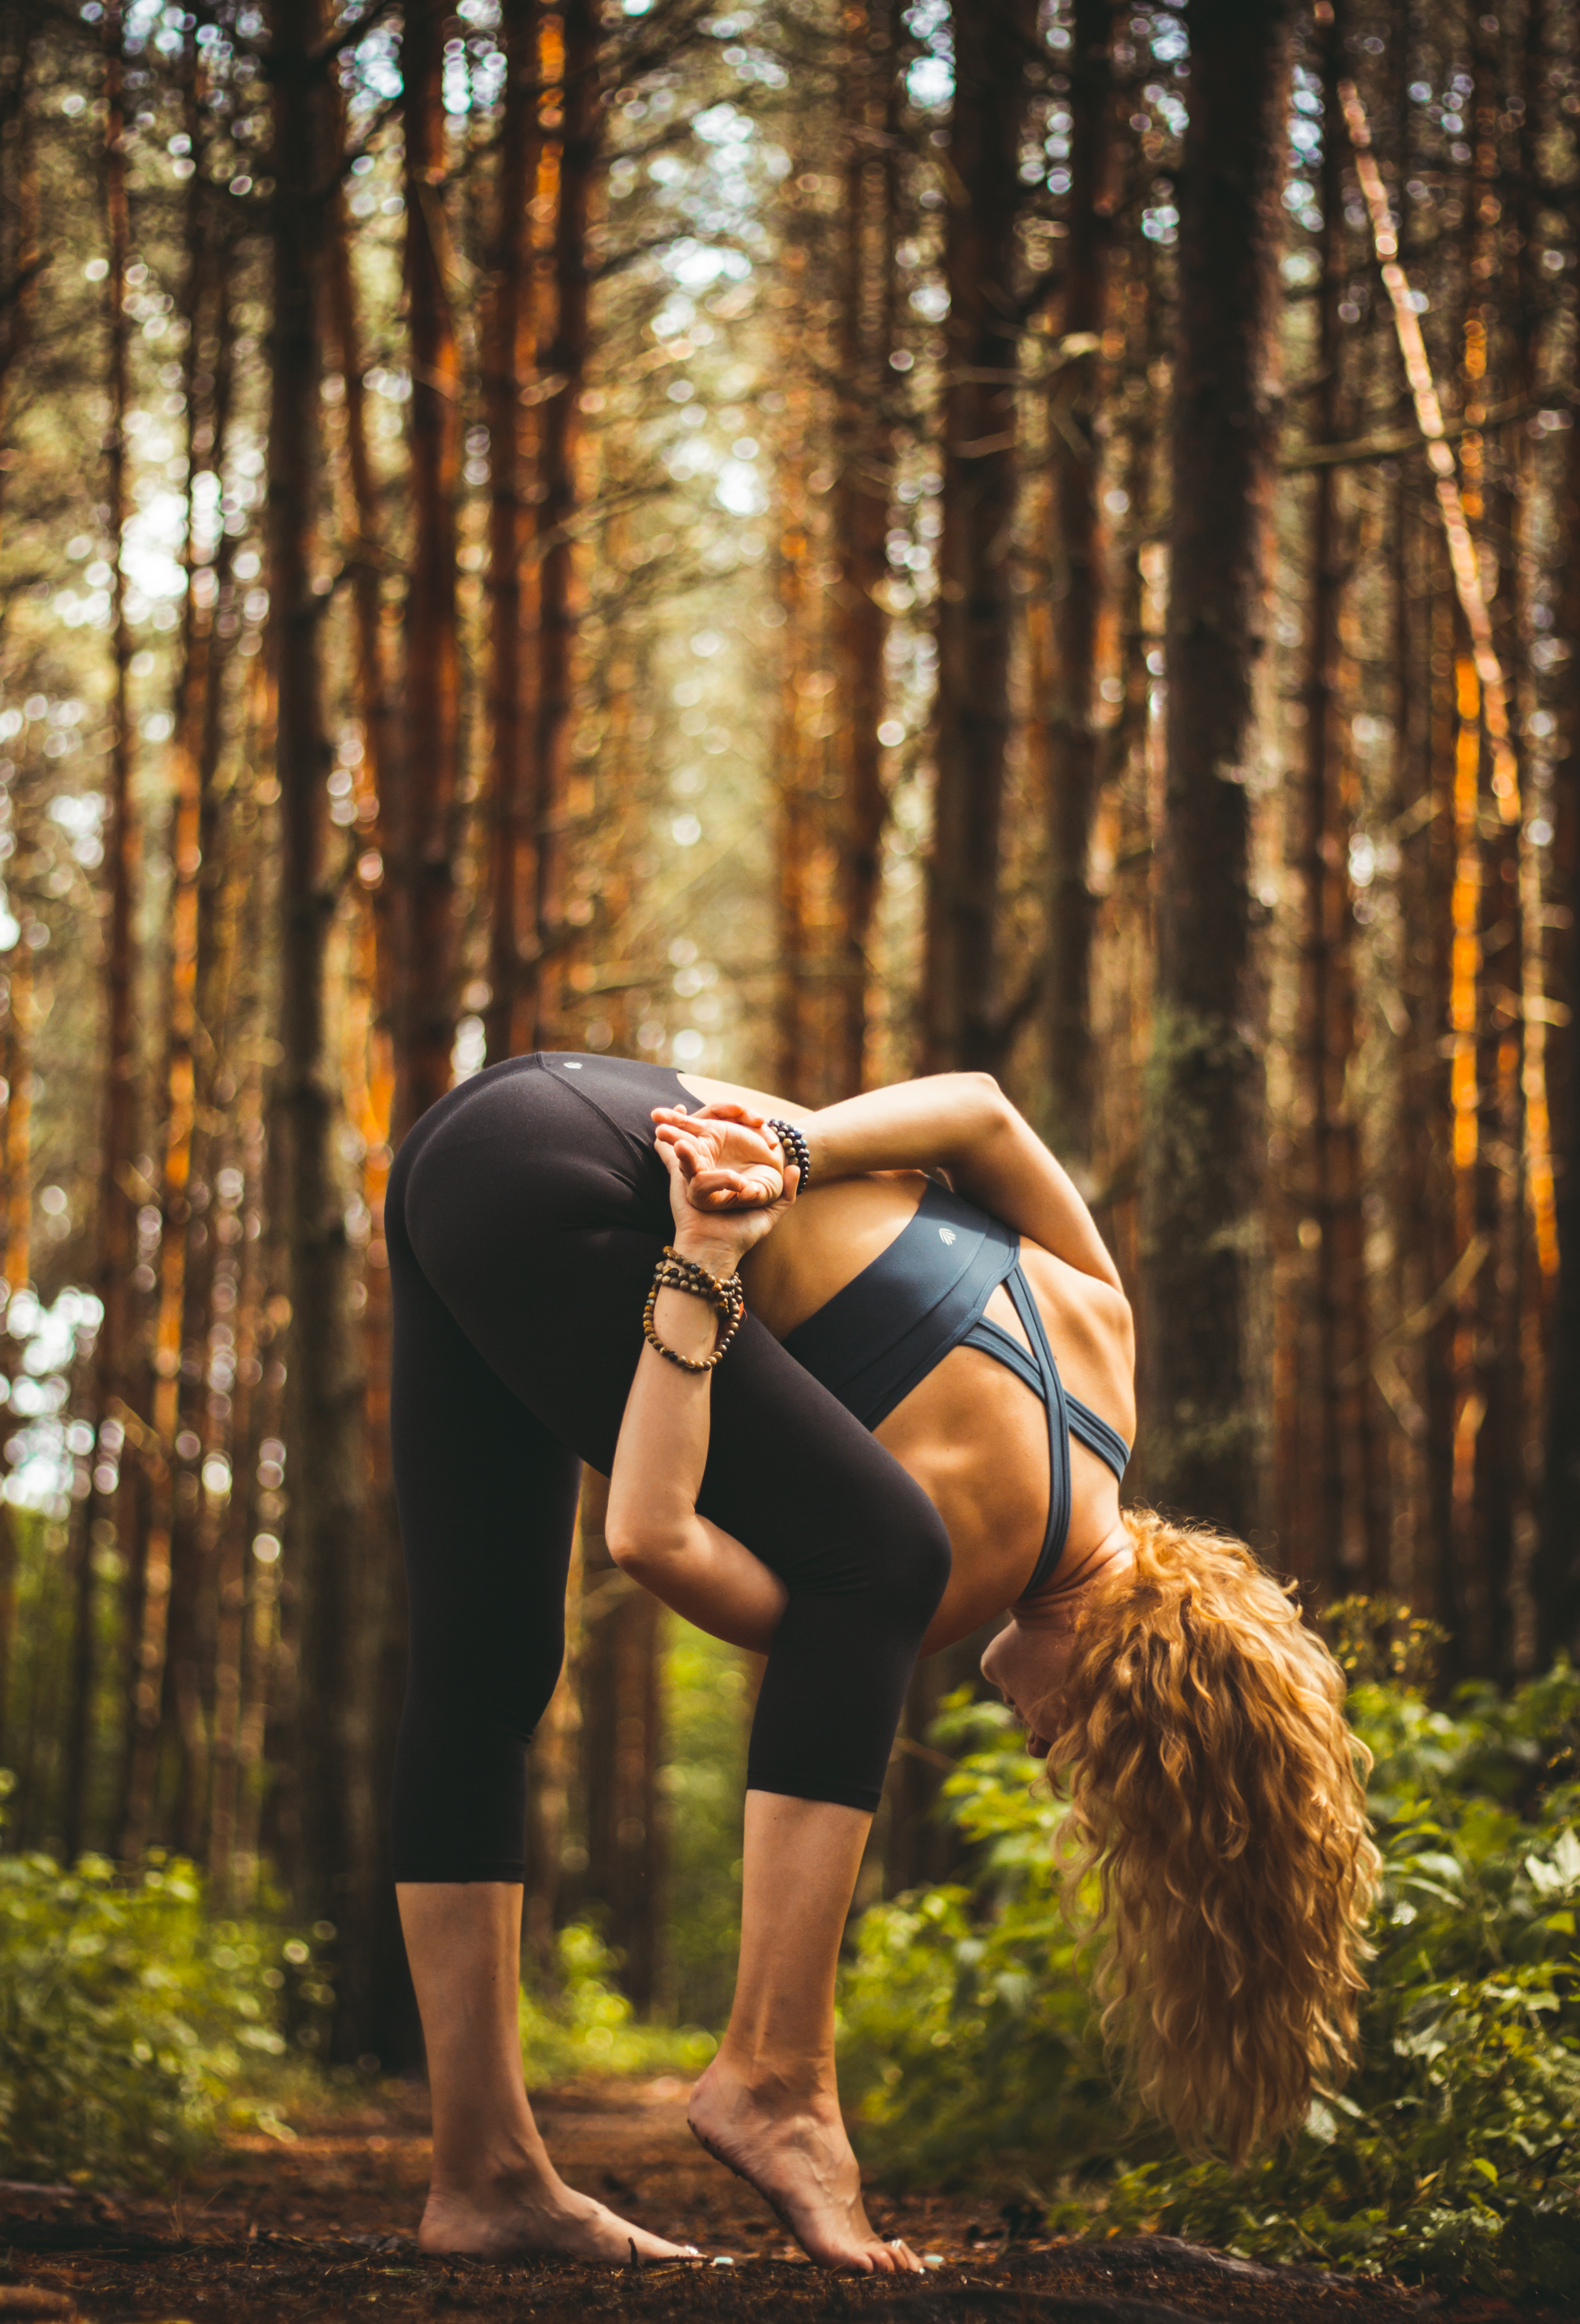 Yoga In The Forest Wallpapers High Quality | Download Free